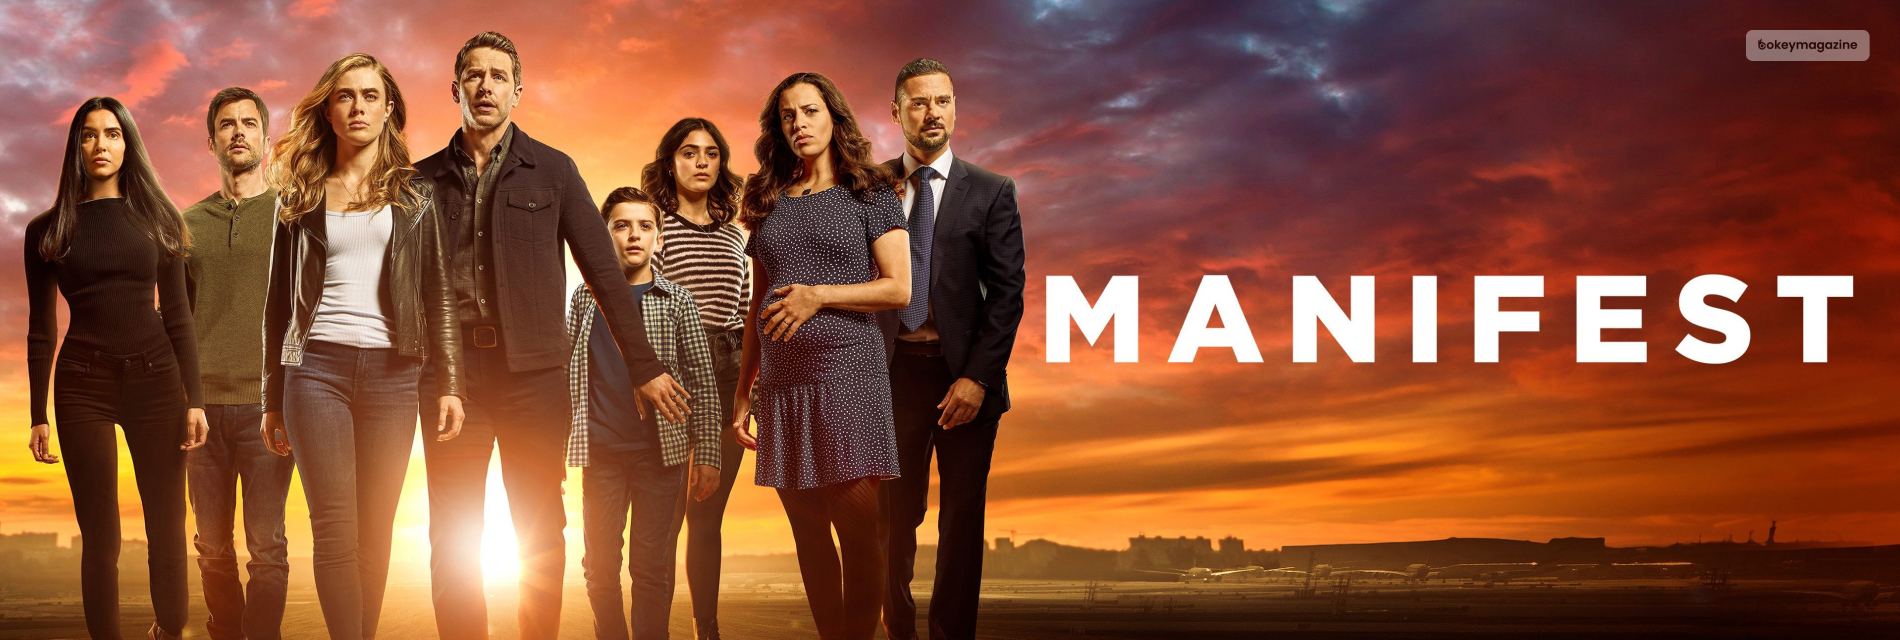 Manifest Season 2 Examining The Power of Belief and The Supernatural